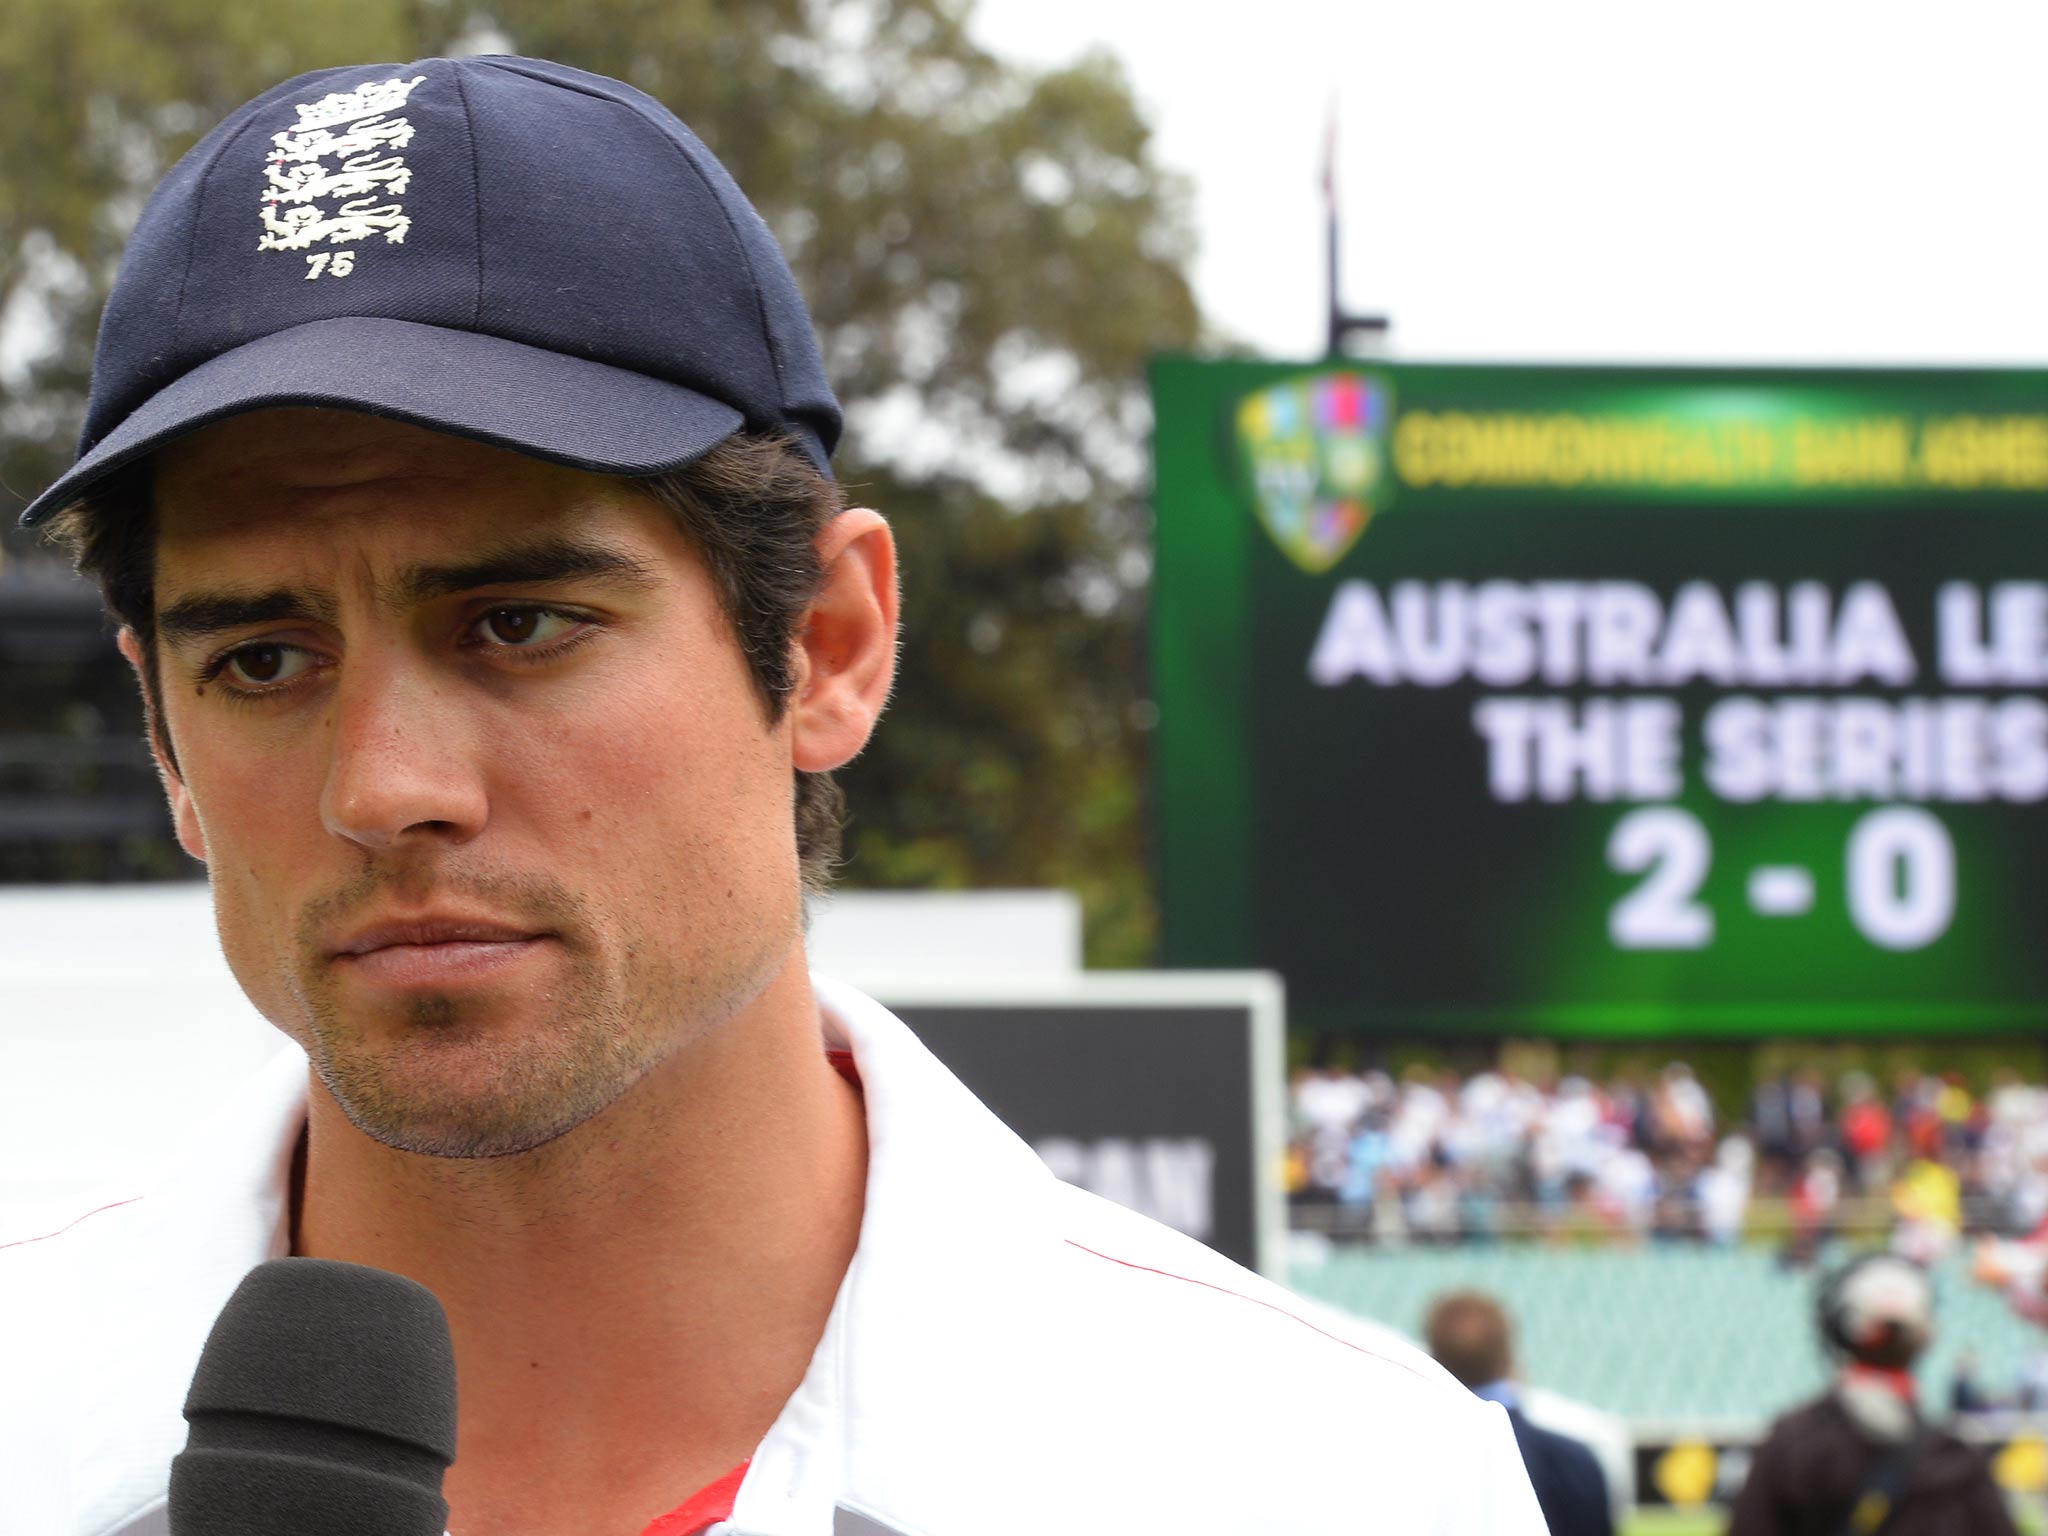 Alastair Cook talks to the press following England's second defeat in the Ashes series